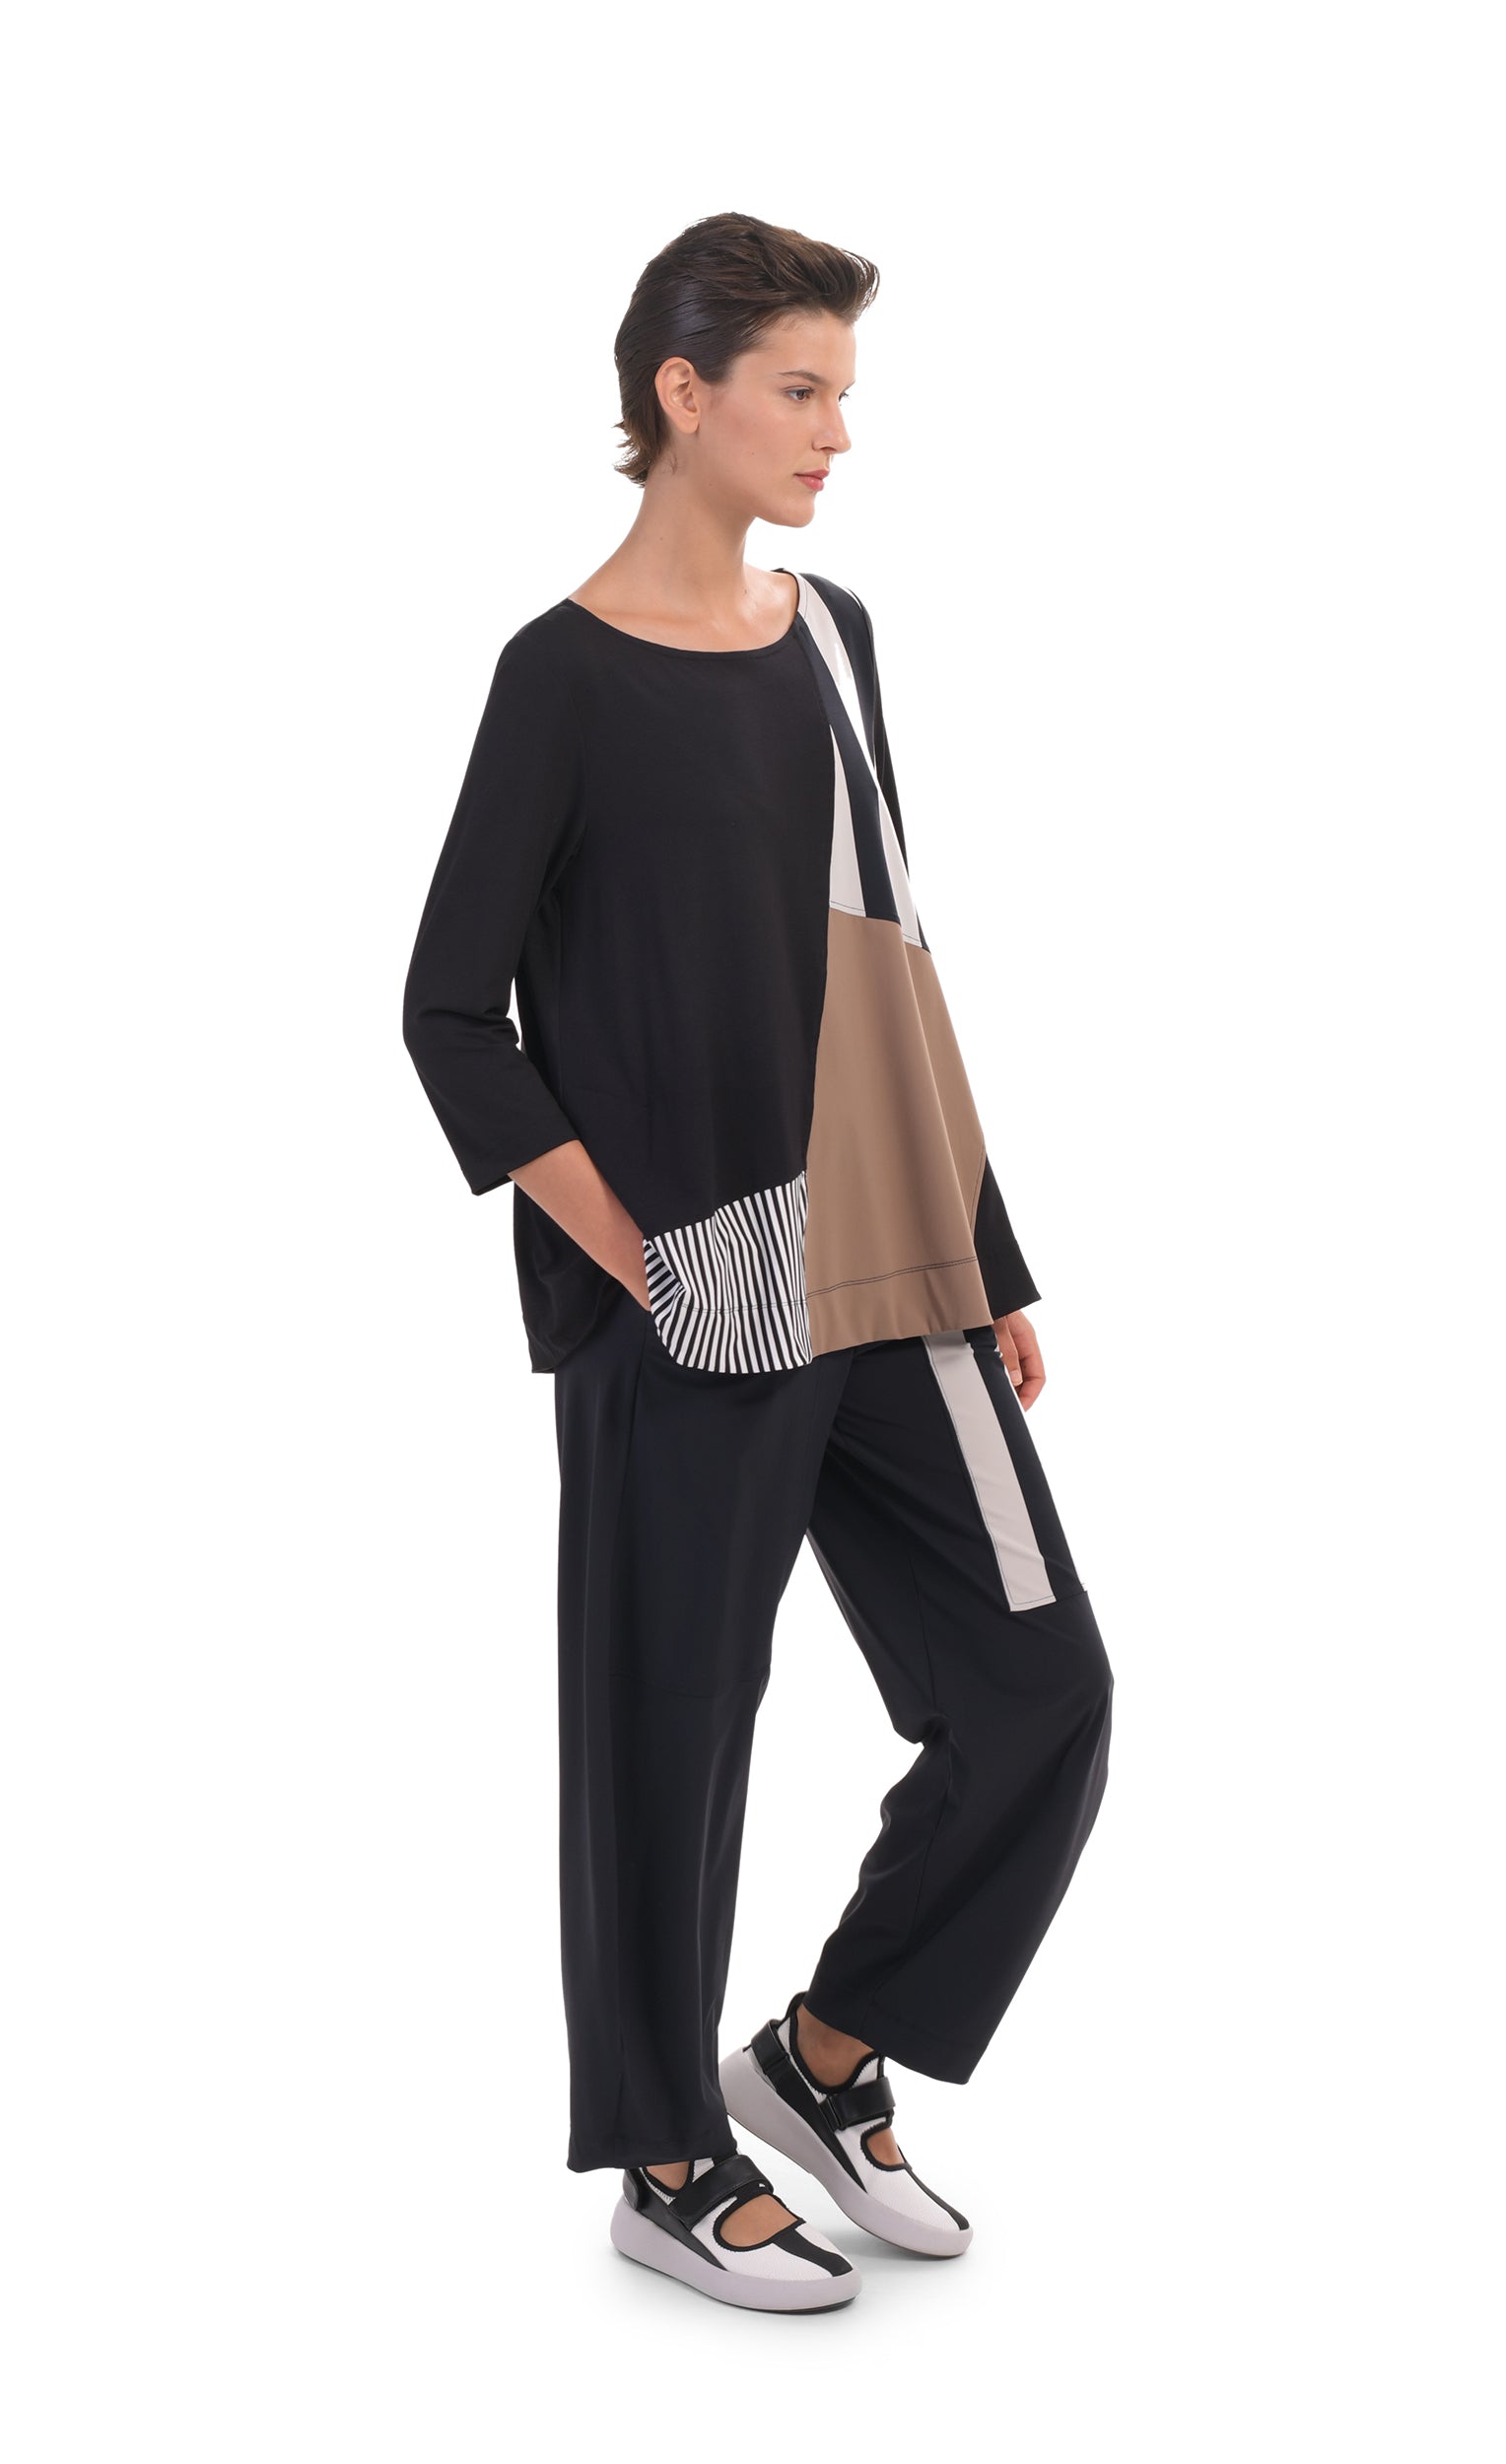 Front, left full body view of a woman wearing the alembika tekbika mixed print top. This top has 3/4 length sleeves and blocking of black and white stripes and mocha colored patches. On the bottom she is wearing a wide leg pant with a black and white striped patch.